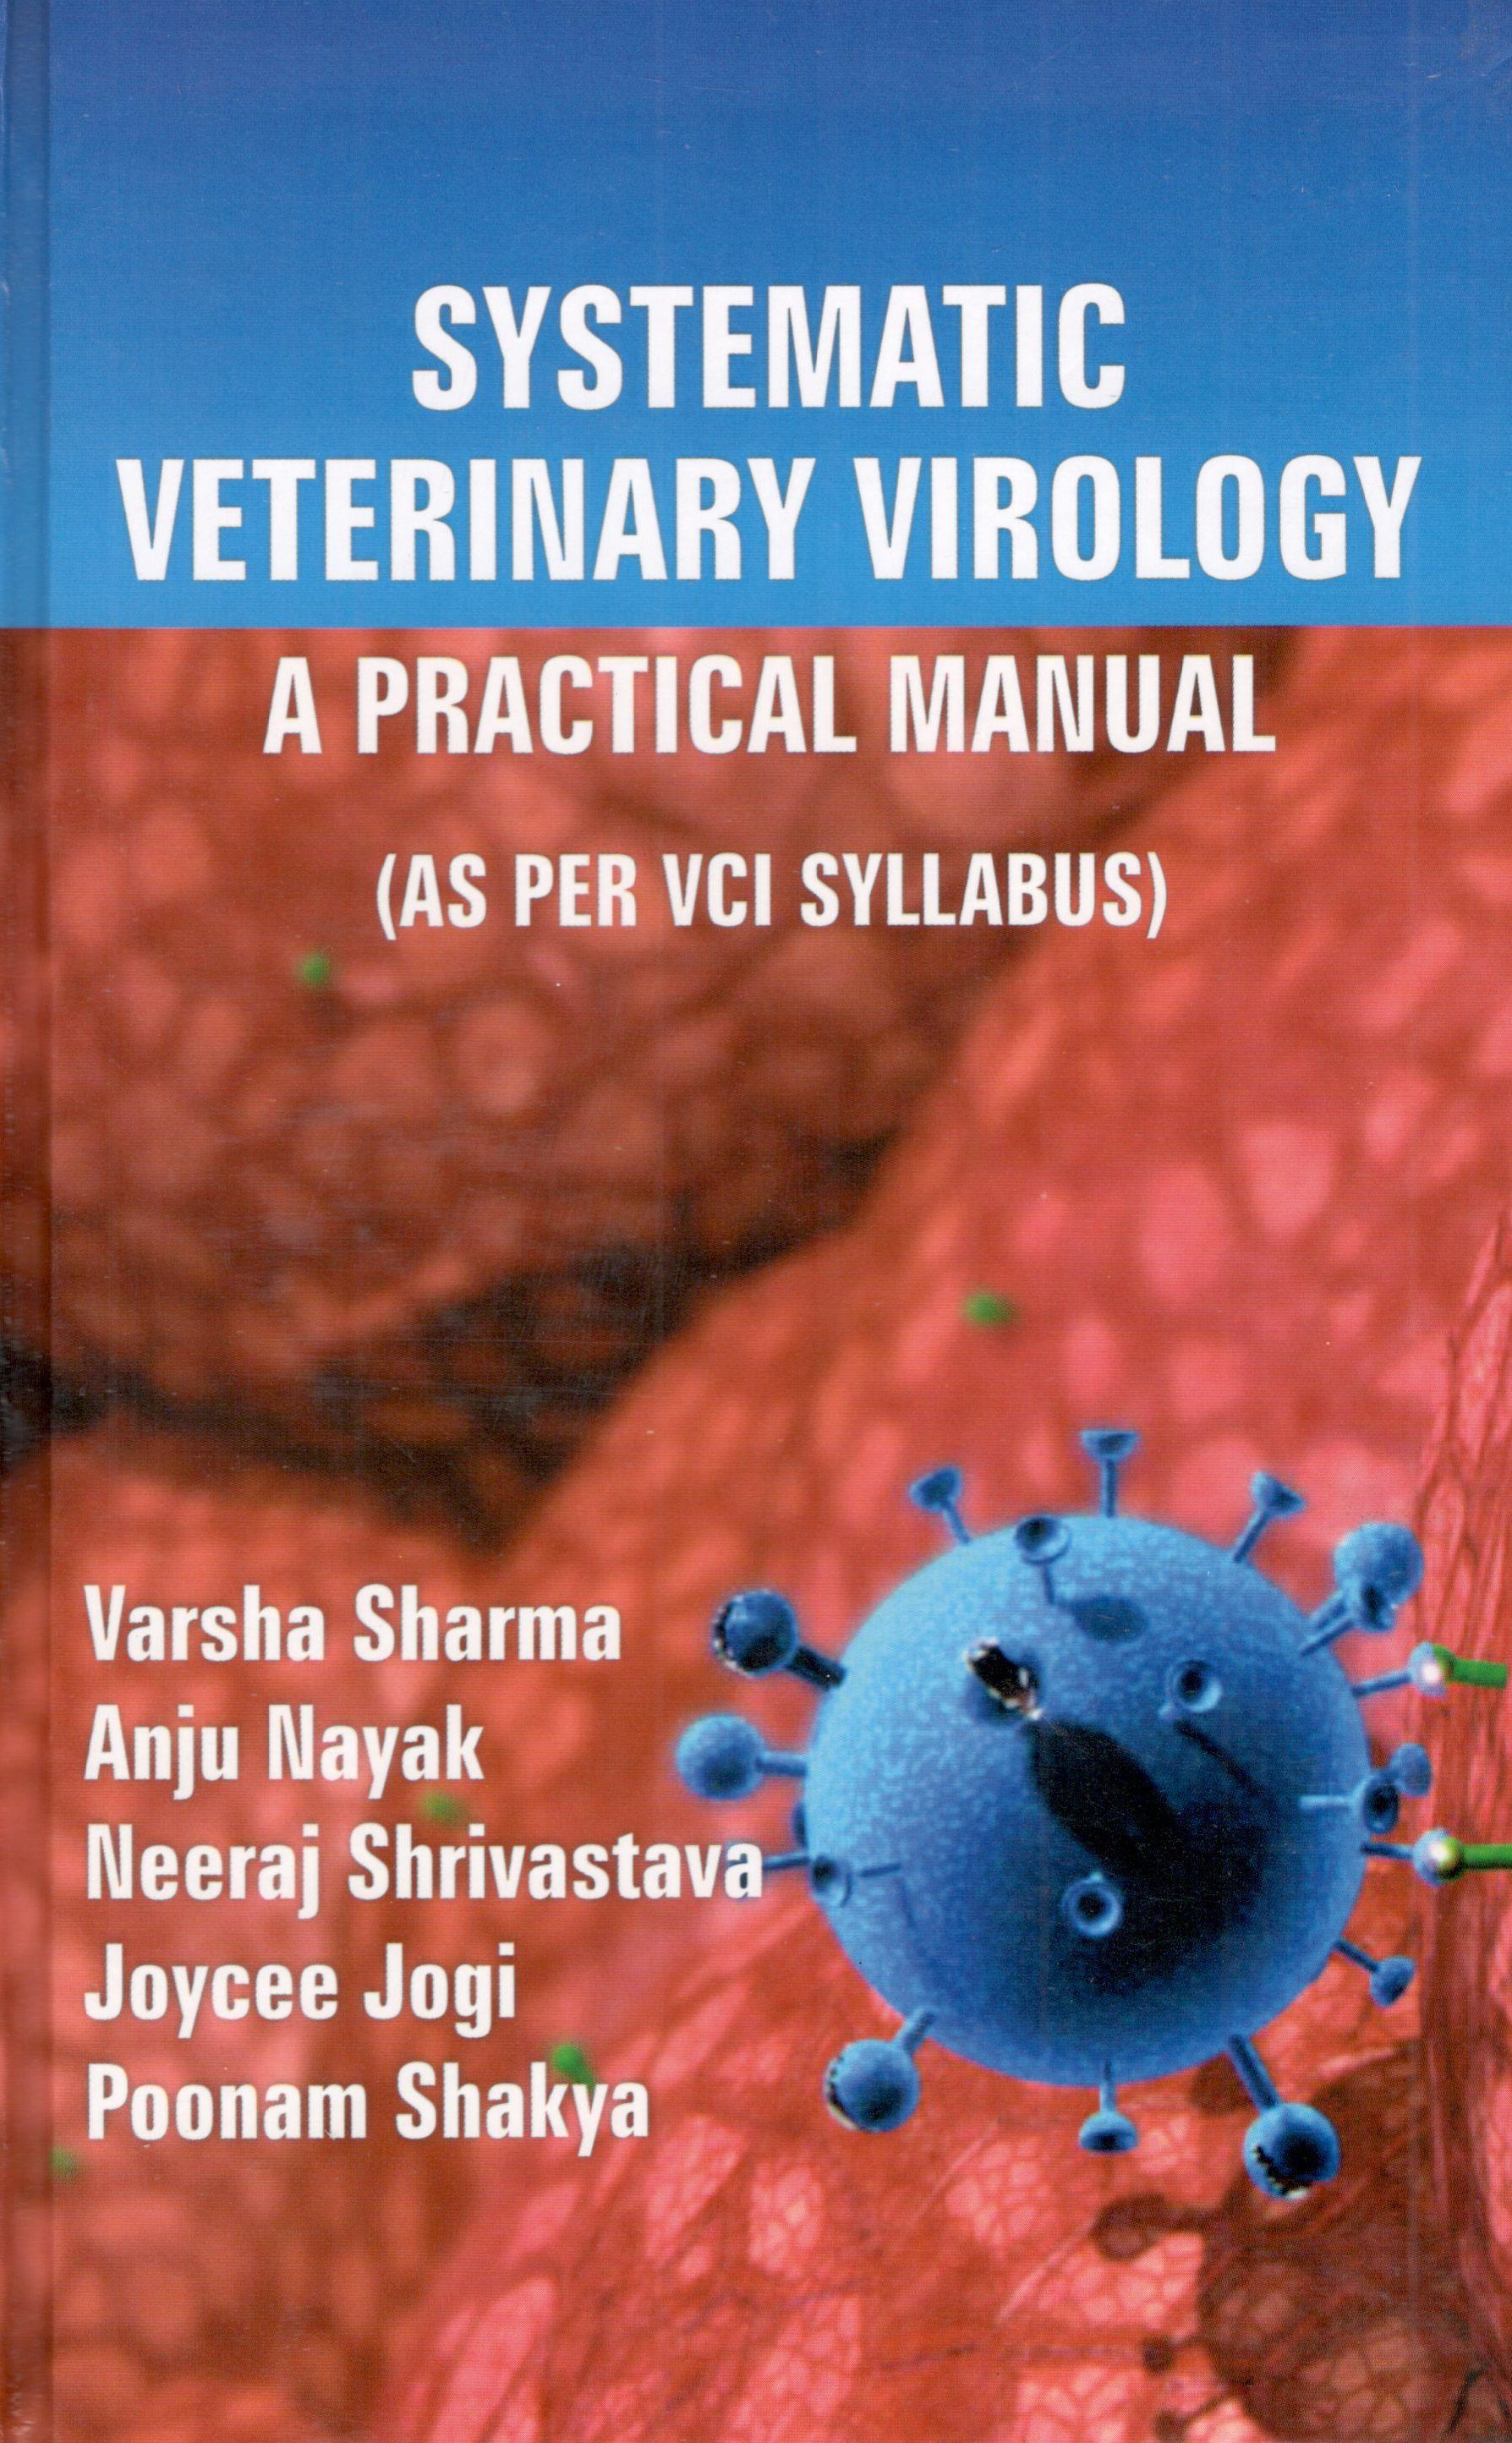 Systematic Veterinary Virology A Practical Manual (As Per VCI Syllabus)